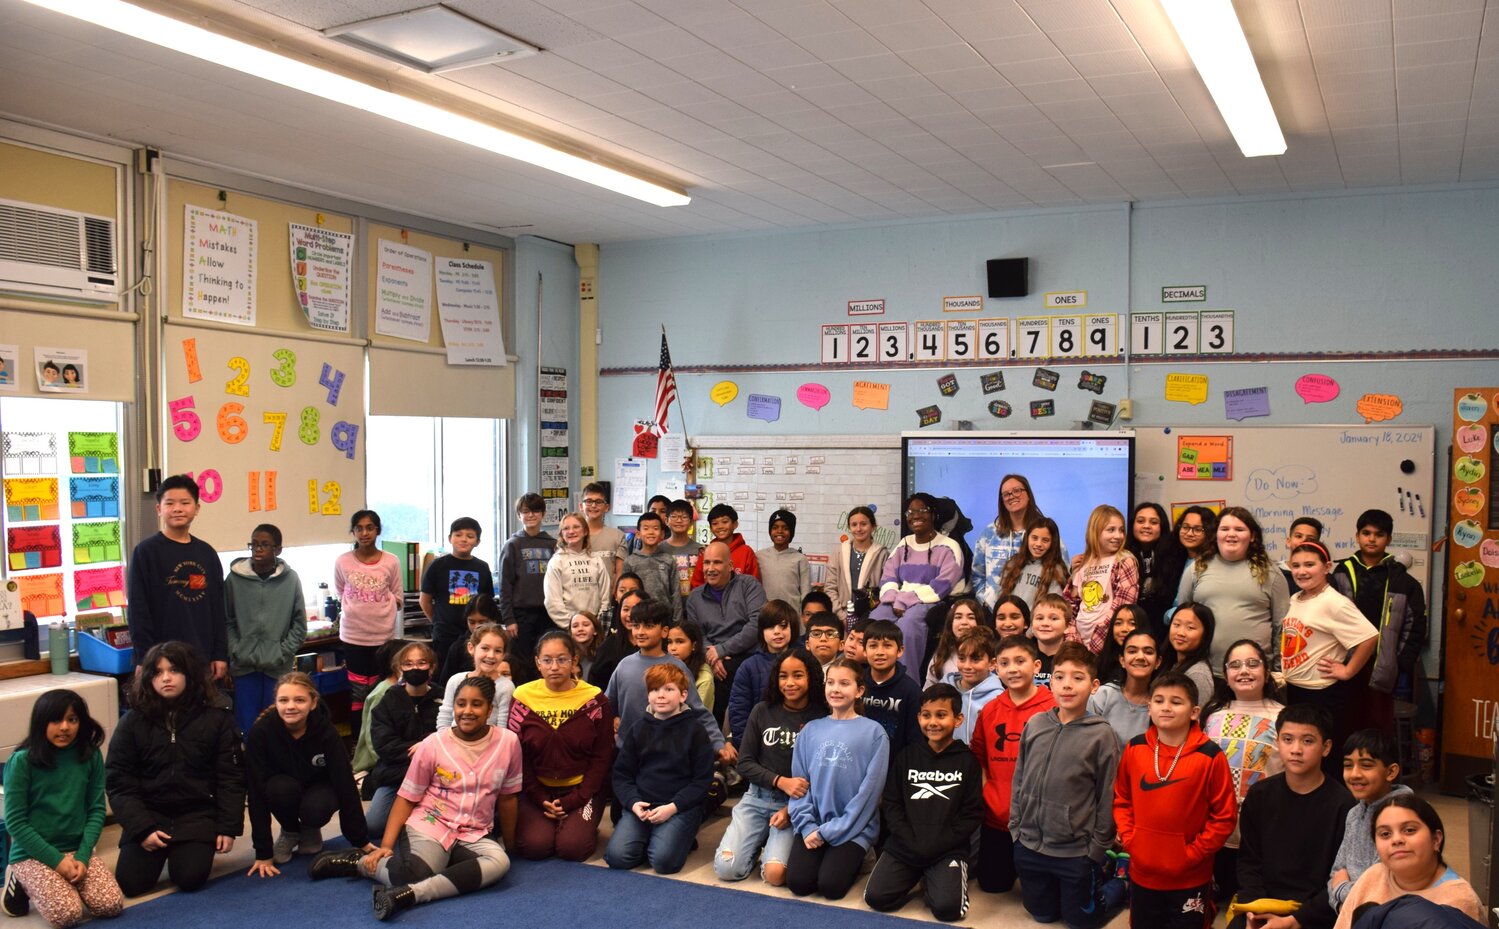 In recognition of Disability Awareness Day, the Viscardi Ambassadors from the Henry Viscardi School visited fifth graders at Bowling Green Elementary School on Jan. 18.